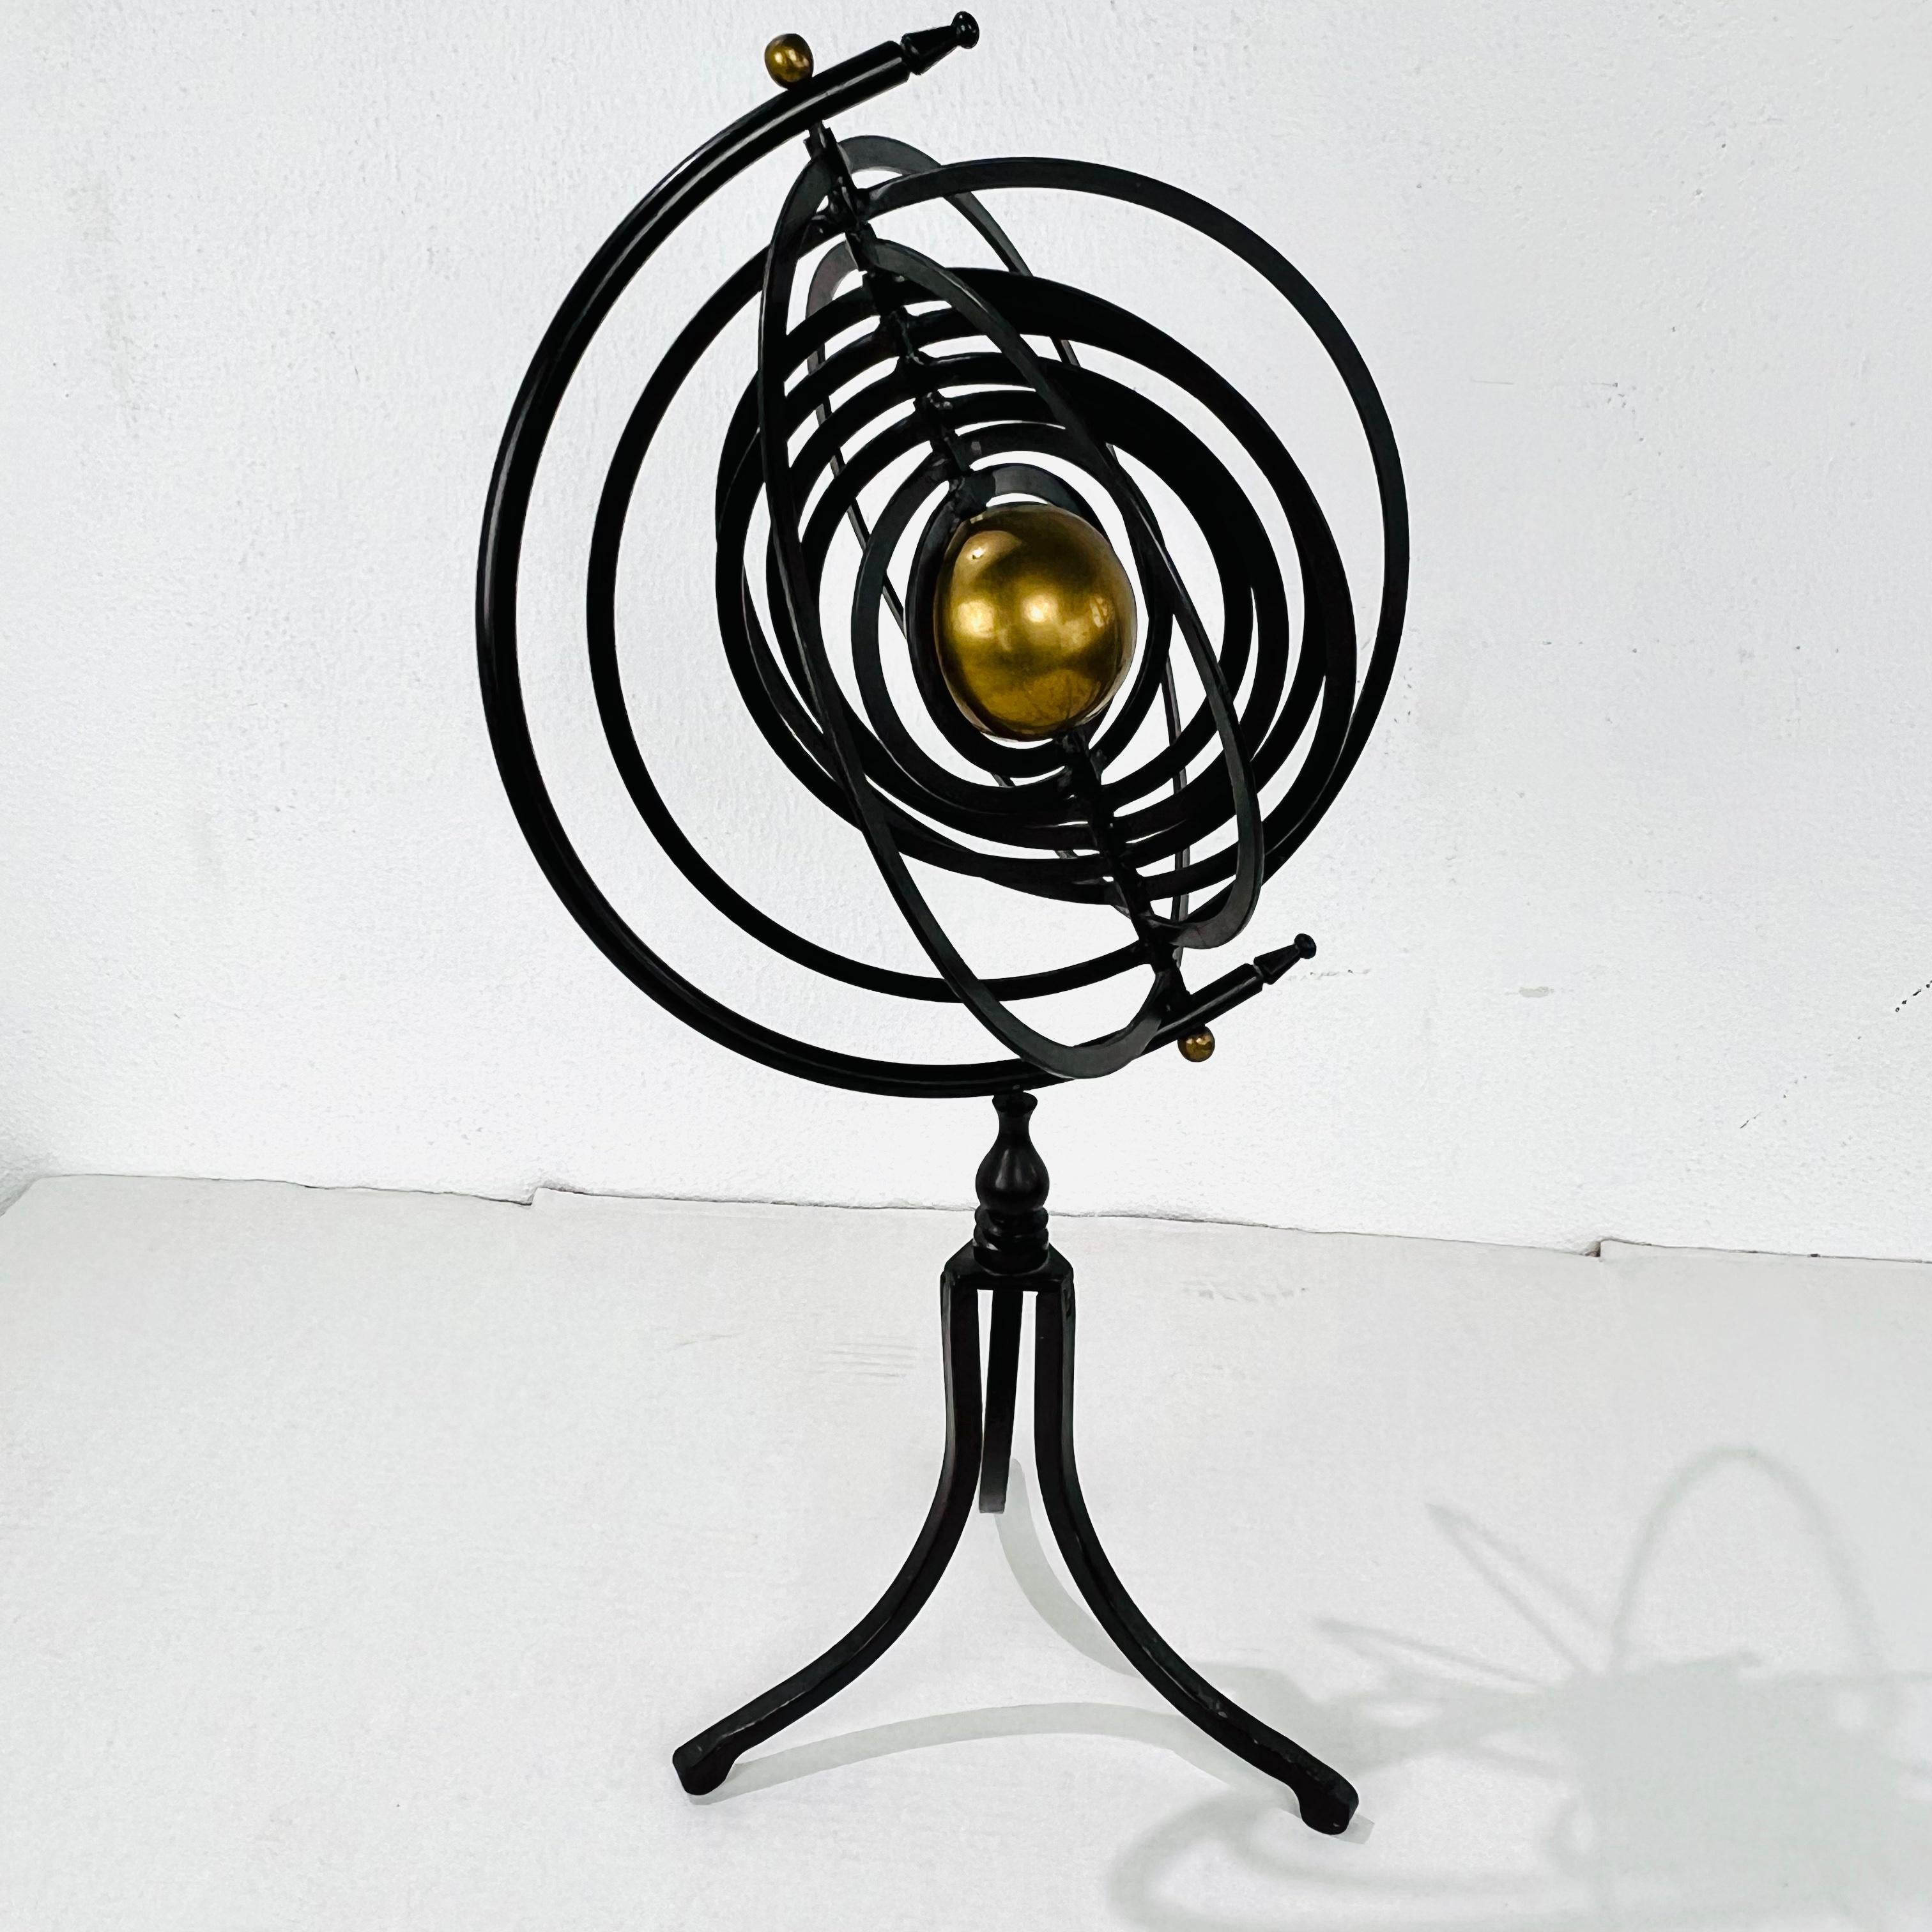 Brass and iron spinning armillary globe with nine hoops and a central 3